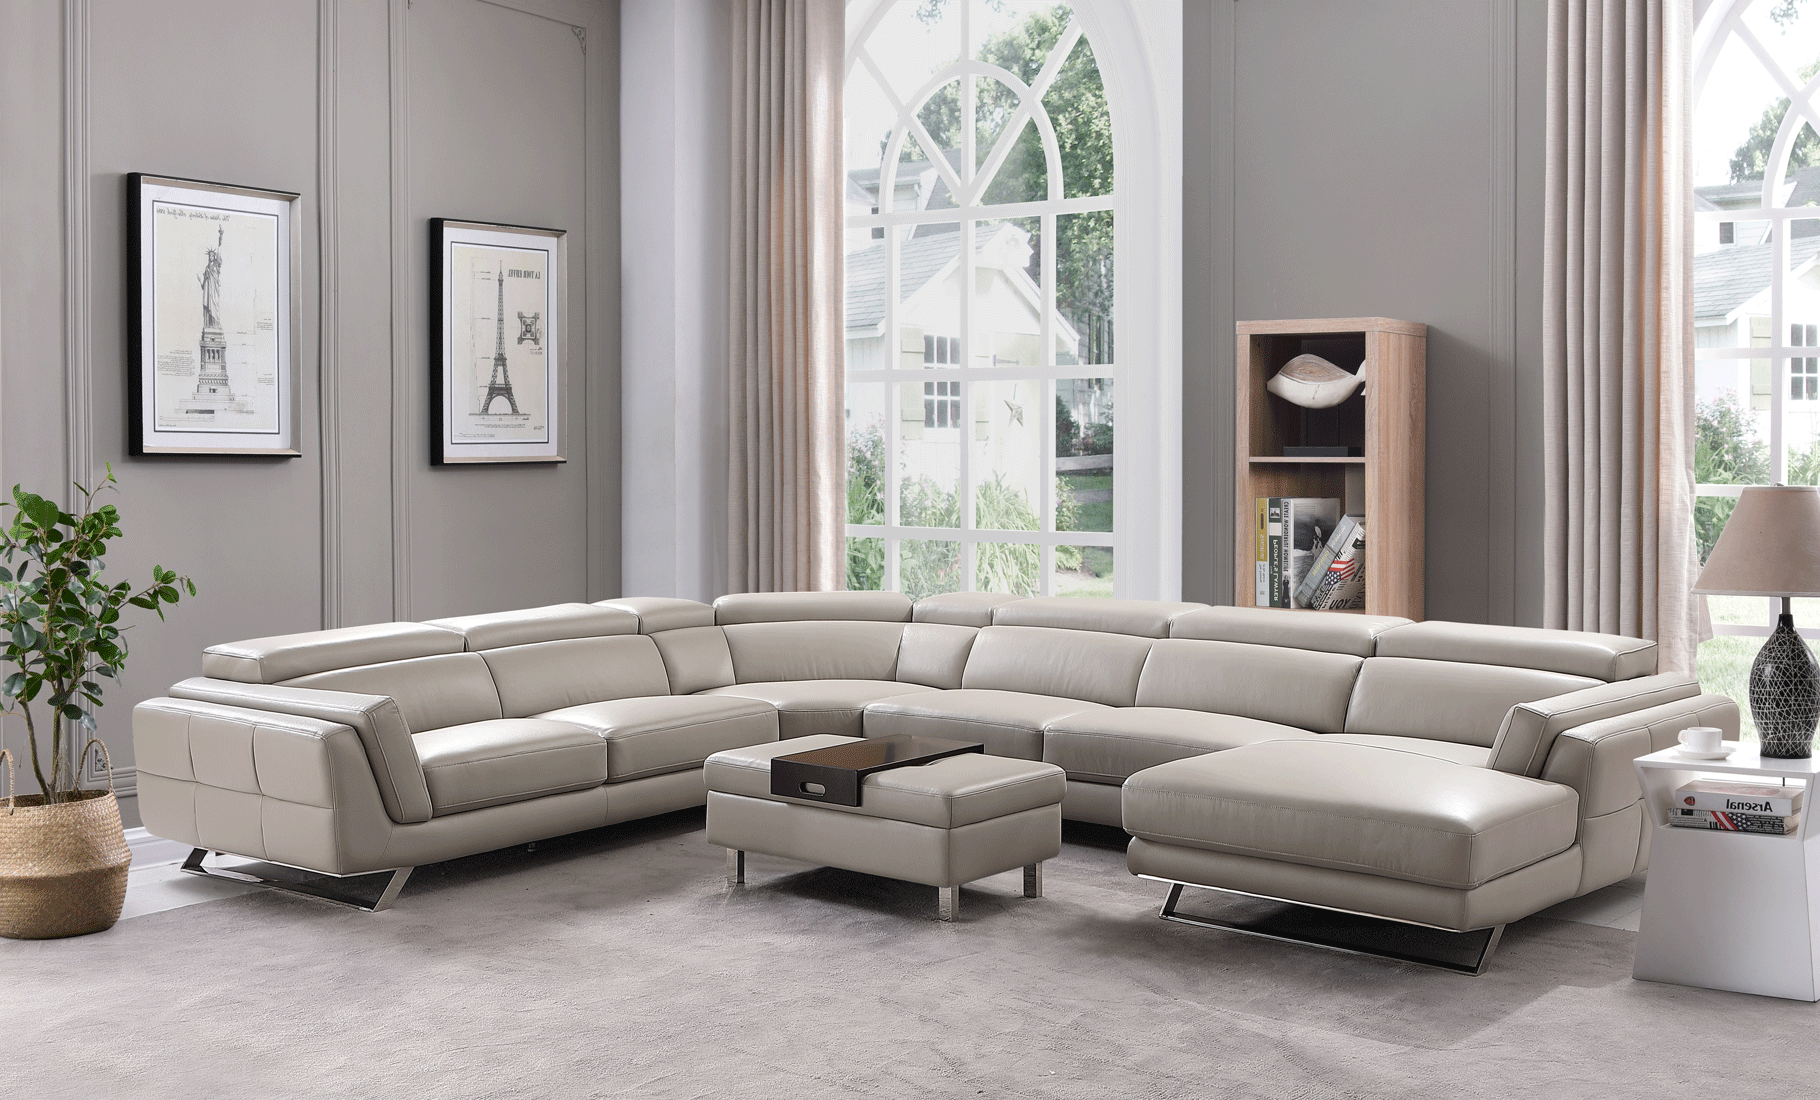 Brands ALF Capri Coffee Tables, Italy 582 Sectional Right